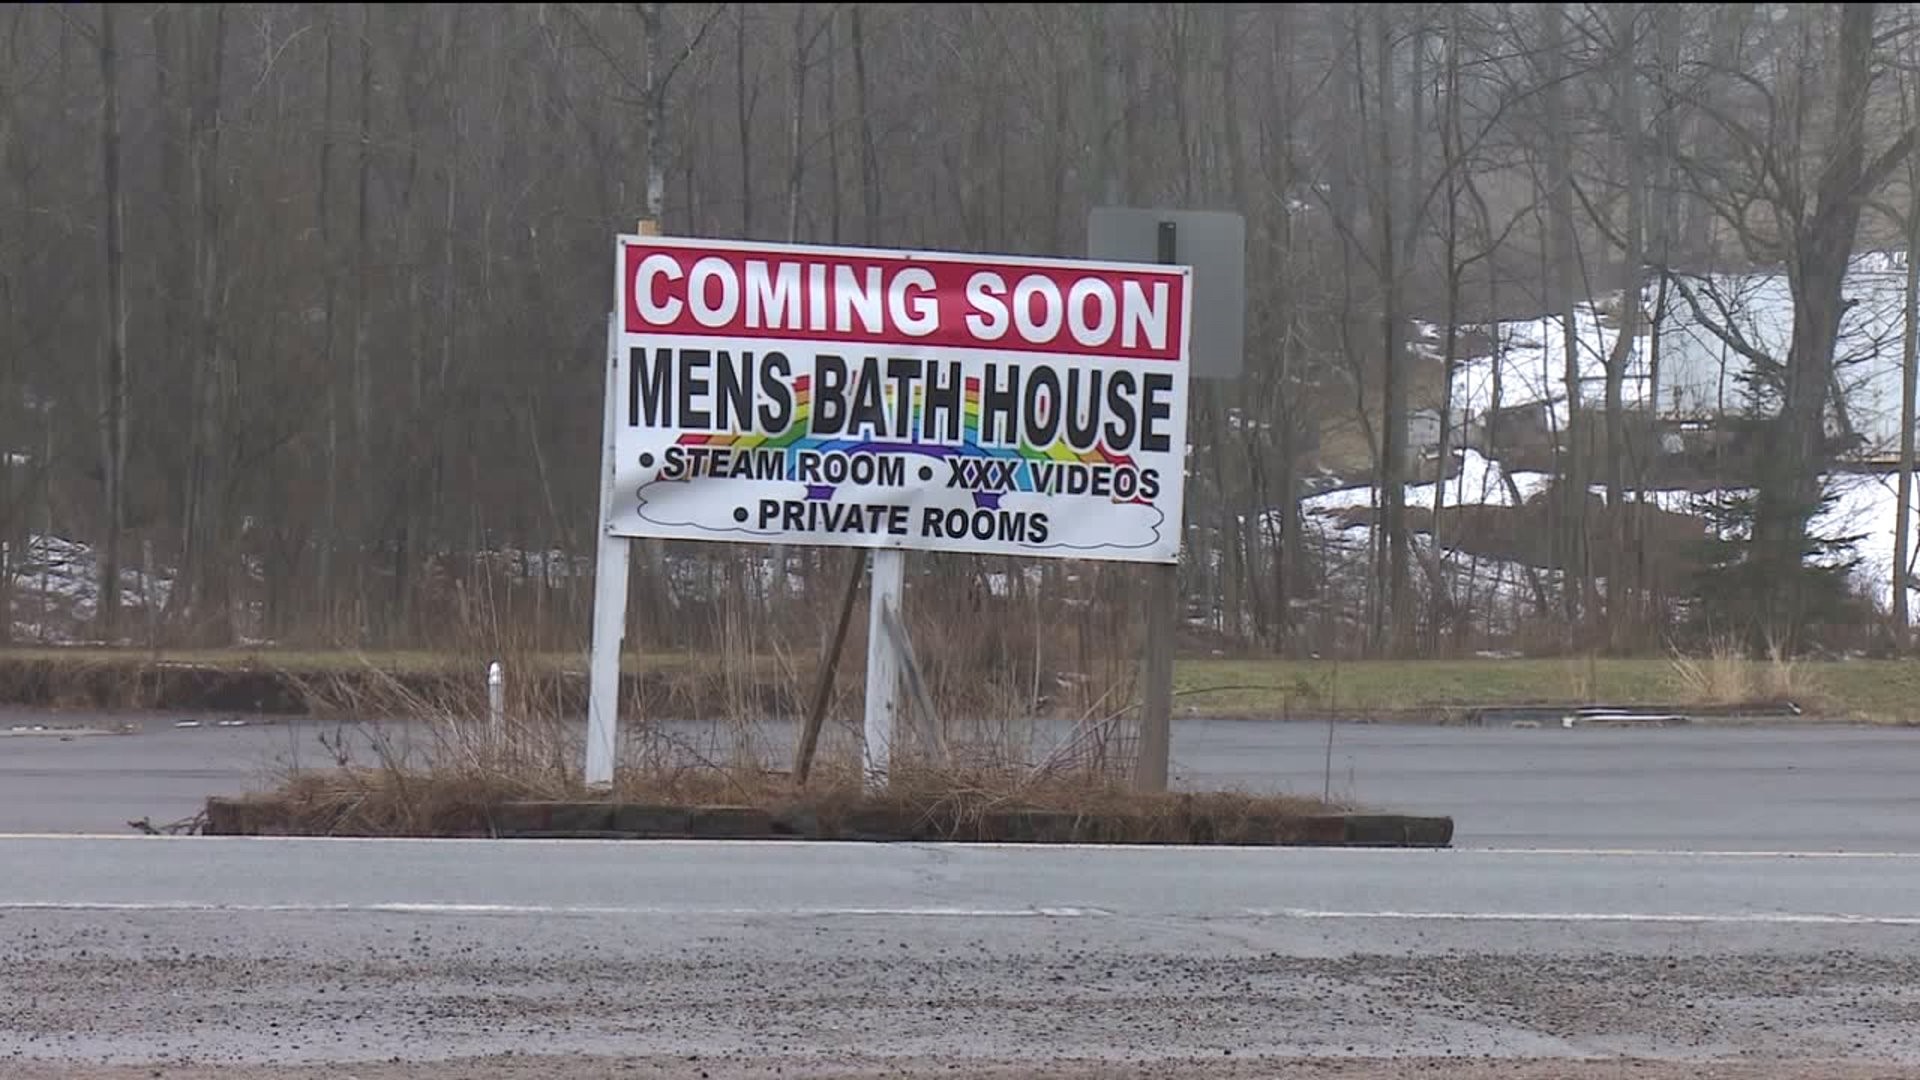 From Car Wash to Bathhouse  New Adult Business Has Neighbors Talking